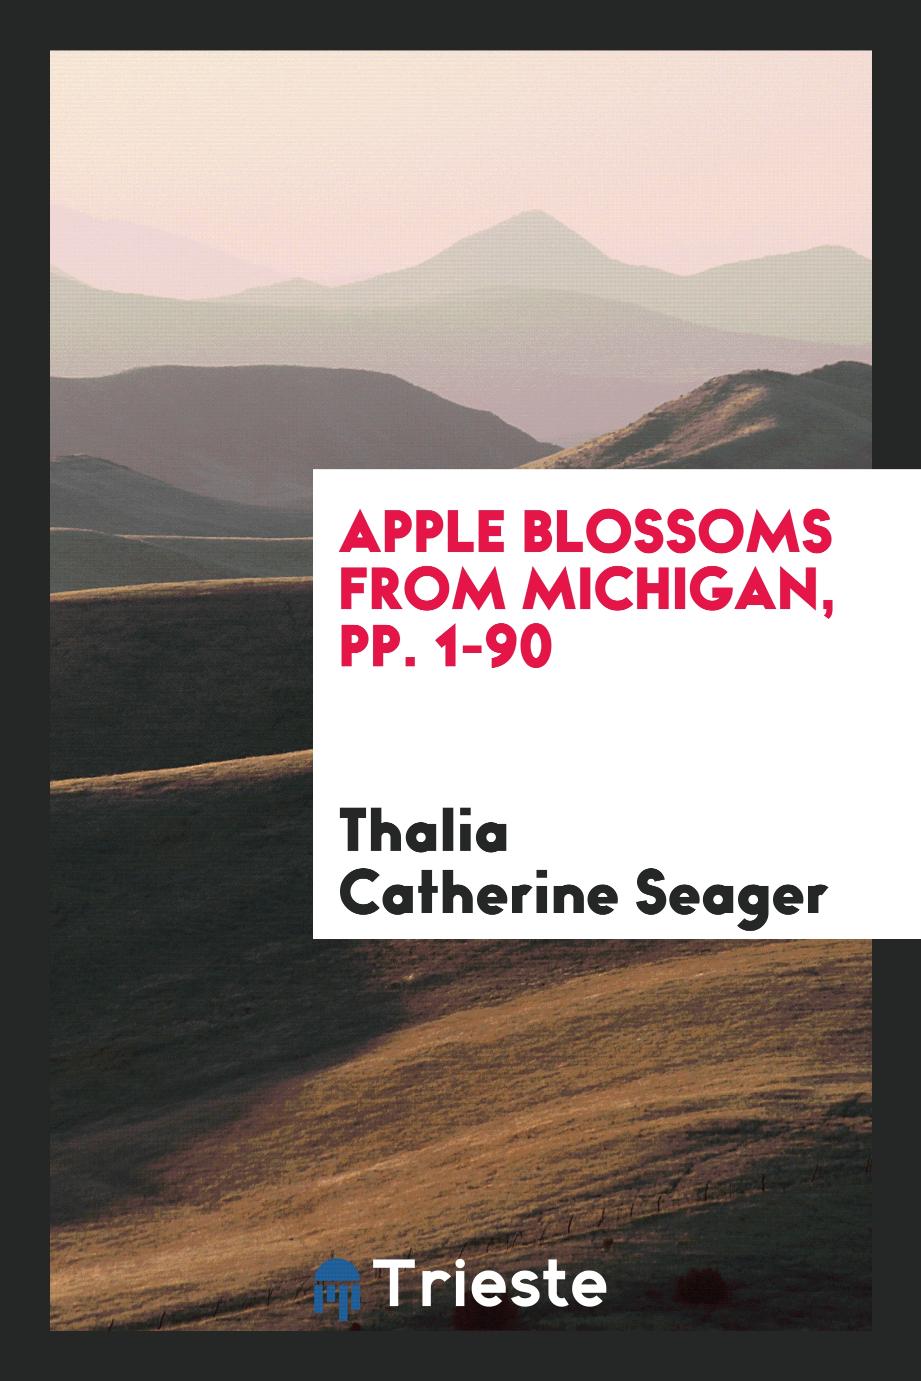 Apple Blossoms from Michigan, pp. 1-90